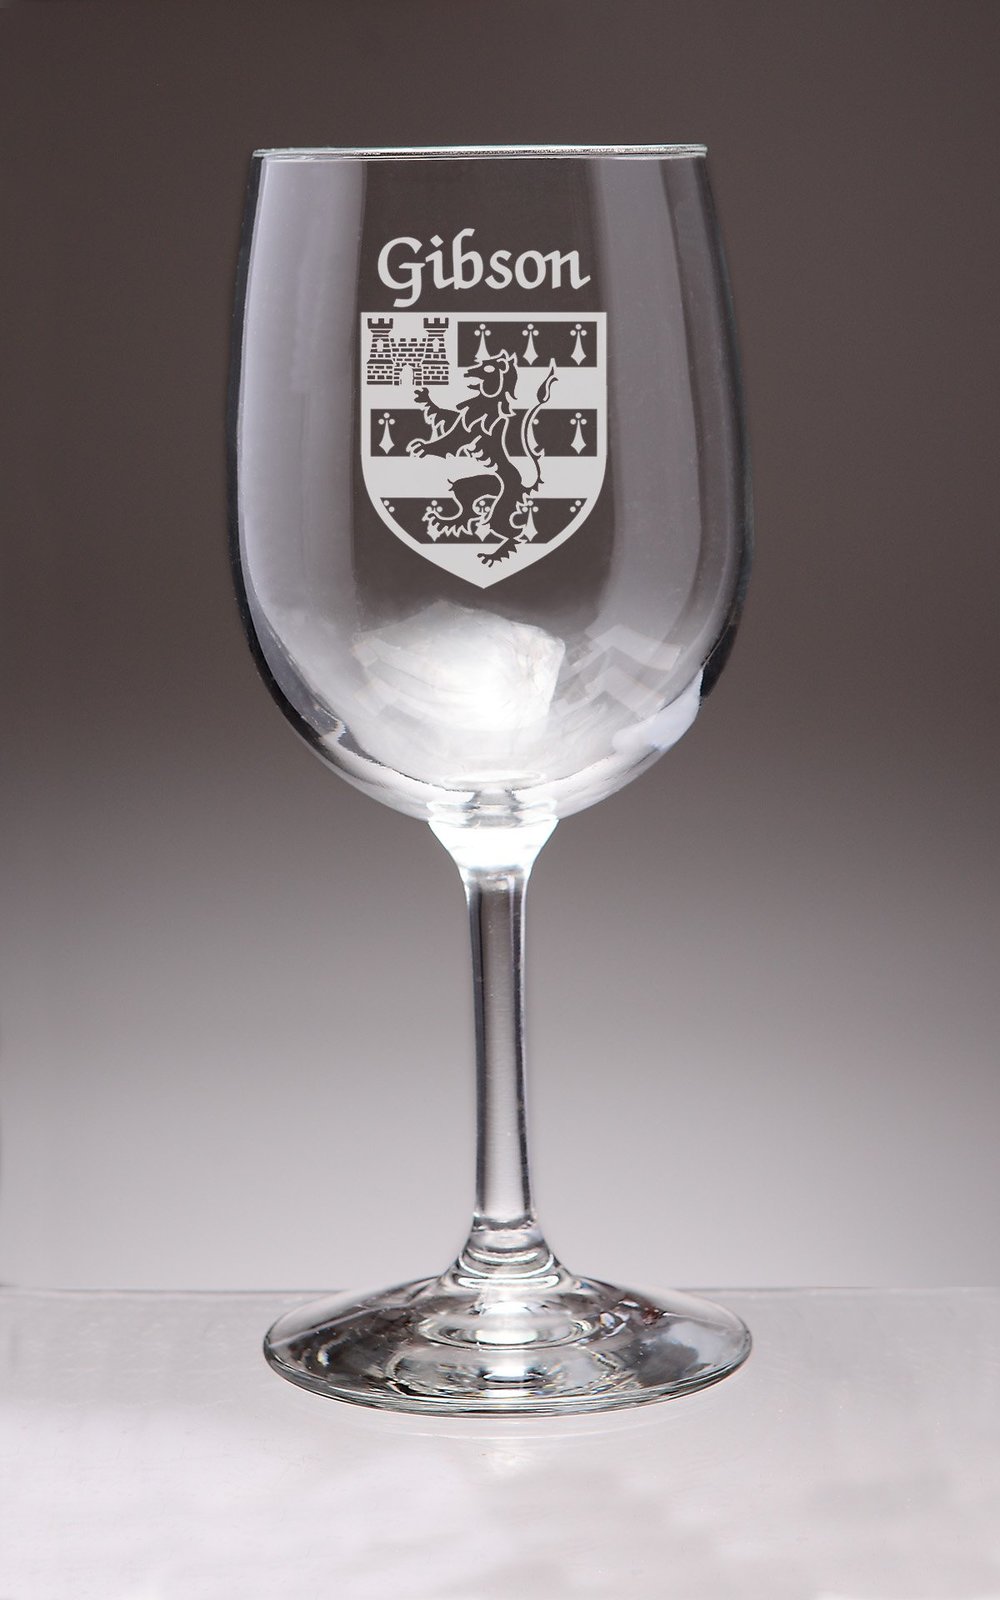 Gibson Irish Coat of Arms Wine Glasses - Set of 4 (Sand Etched) - $68.00